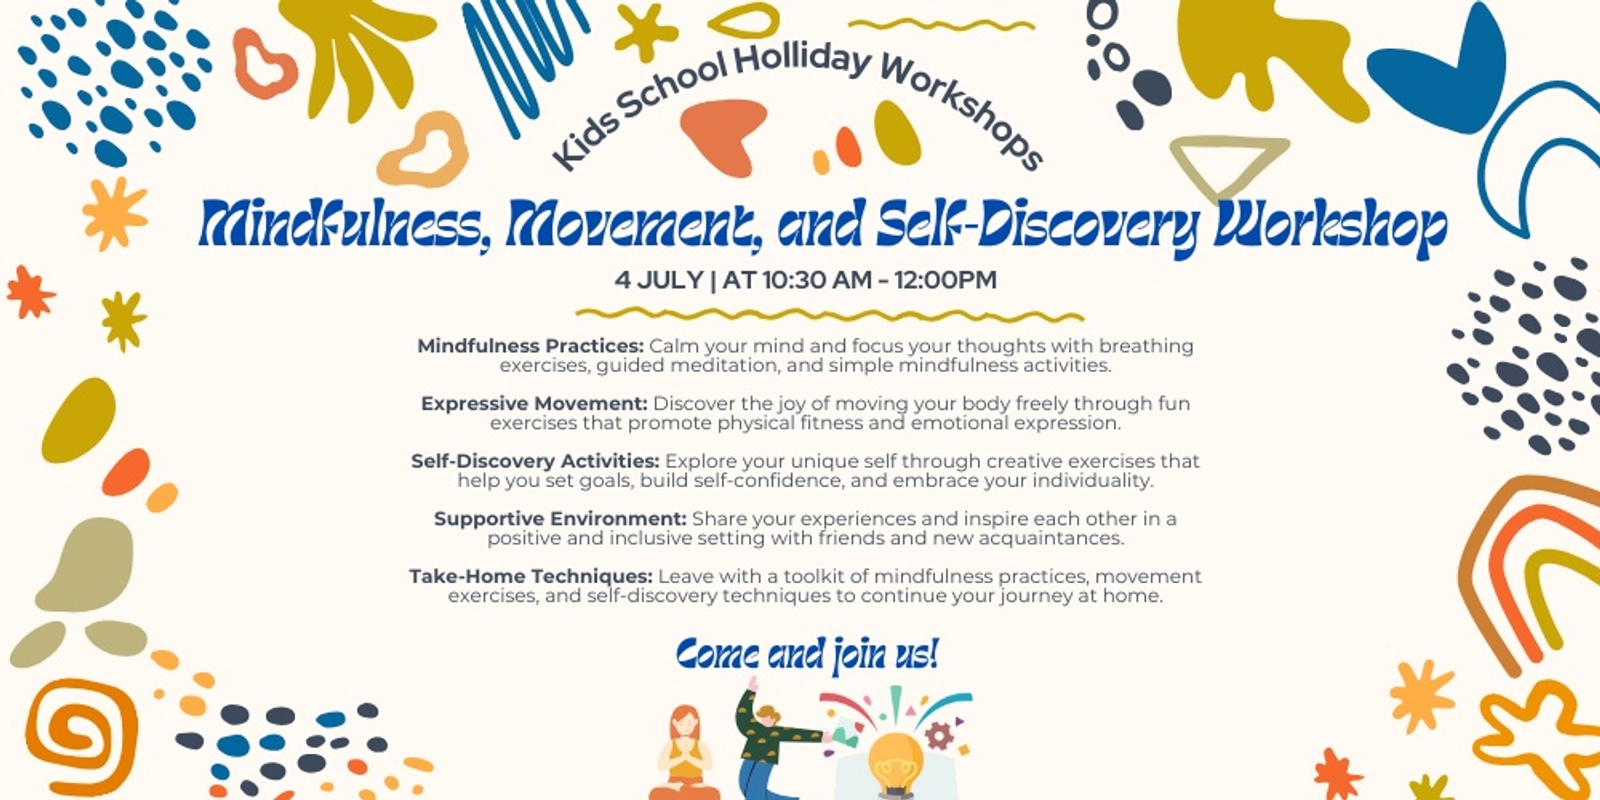 Banner image for School Holliday : Kids Mindfulness, Movement, and Self-Discovery Workshop With Amber